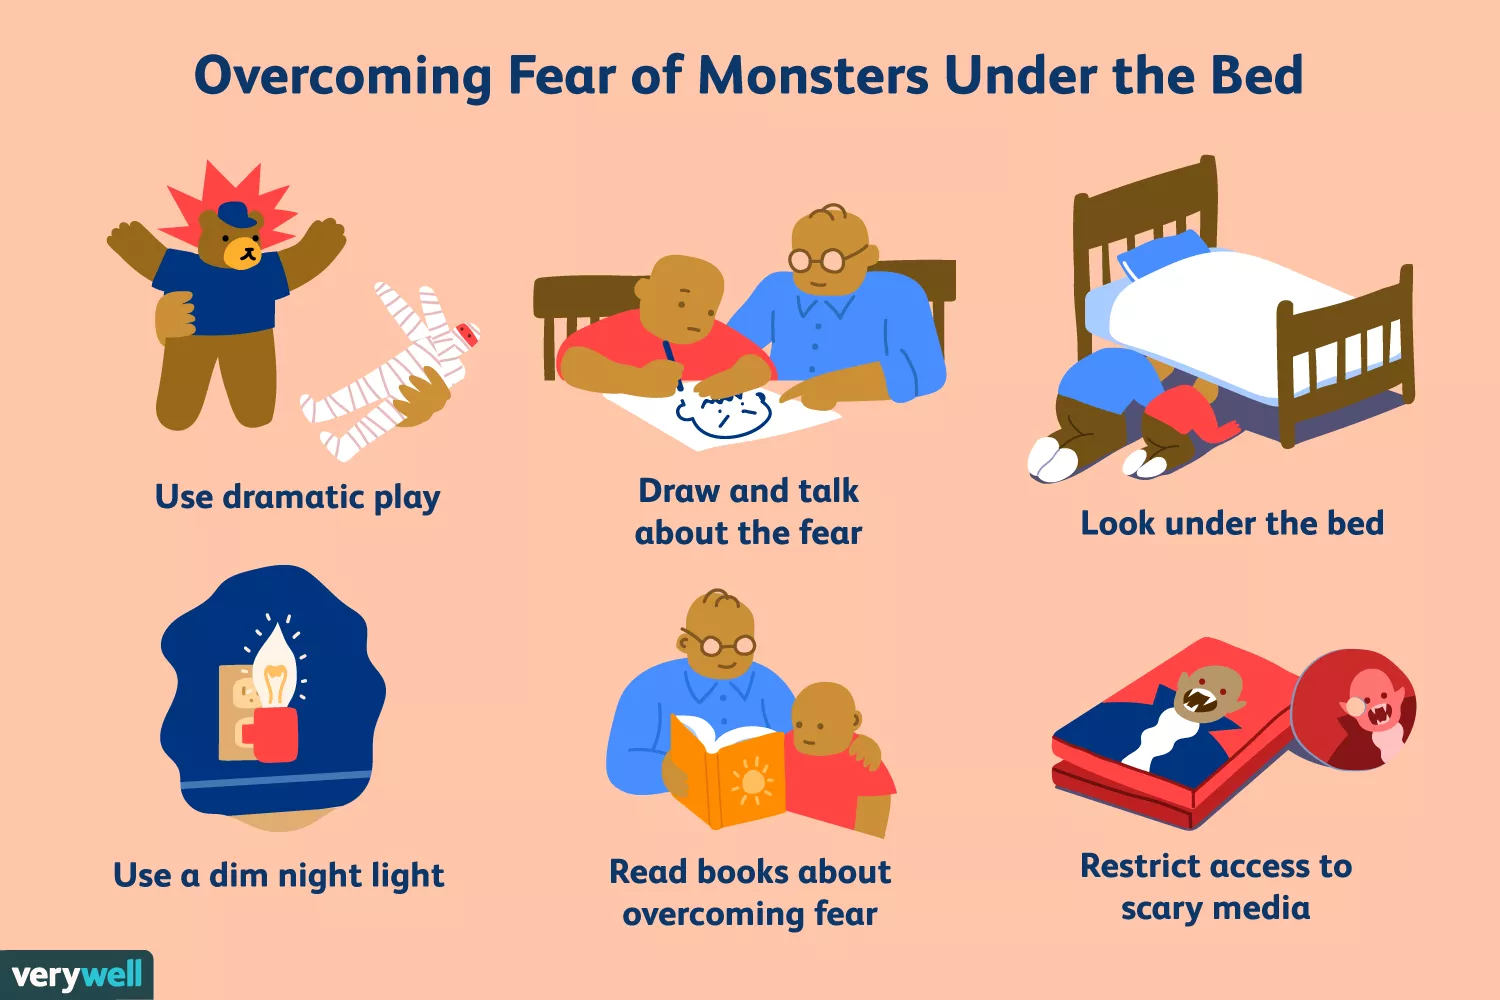 Overcoming fear of monsters under the bed